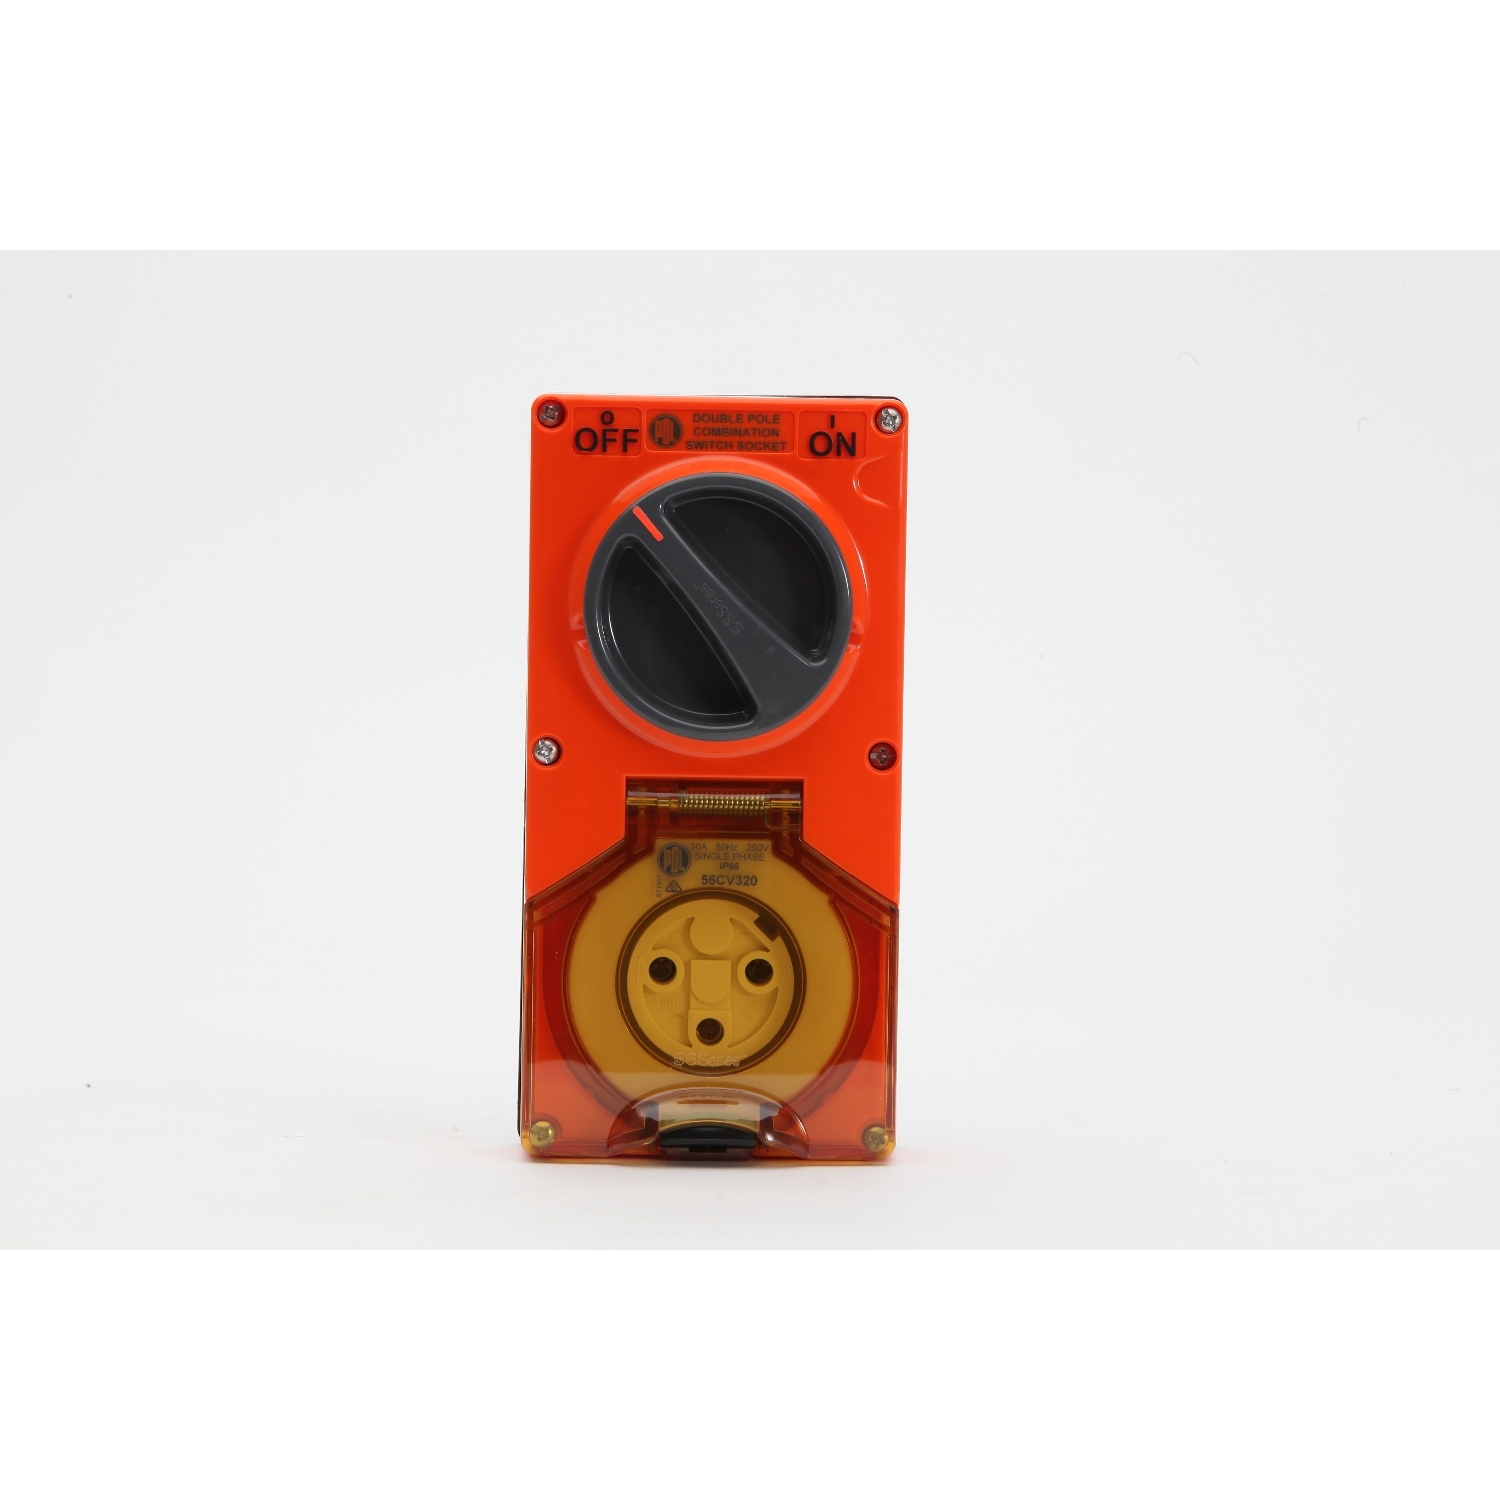 PDL 56 Series - Switched Socket 20A 250V 3-Round Pin 2-Gang 2-Pole IP66 - Chemical-Resistant Orange